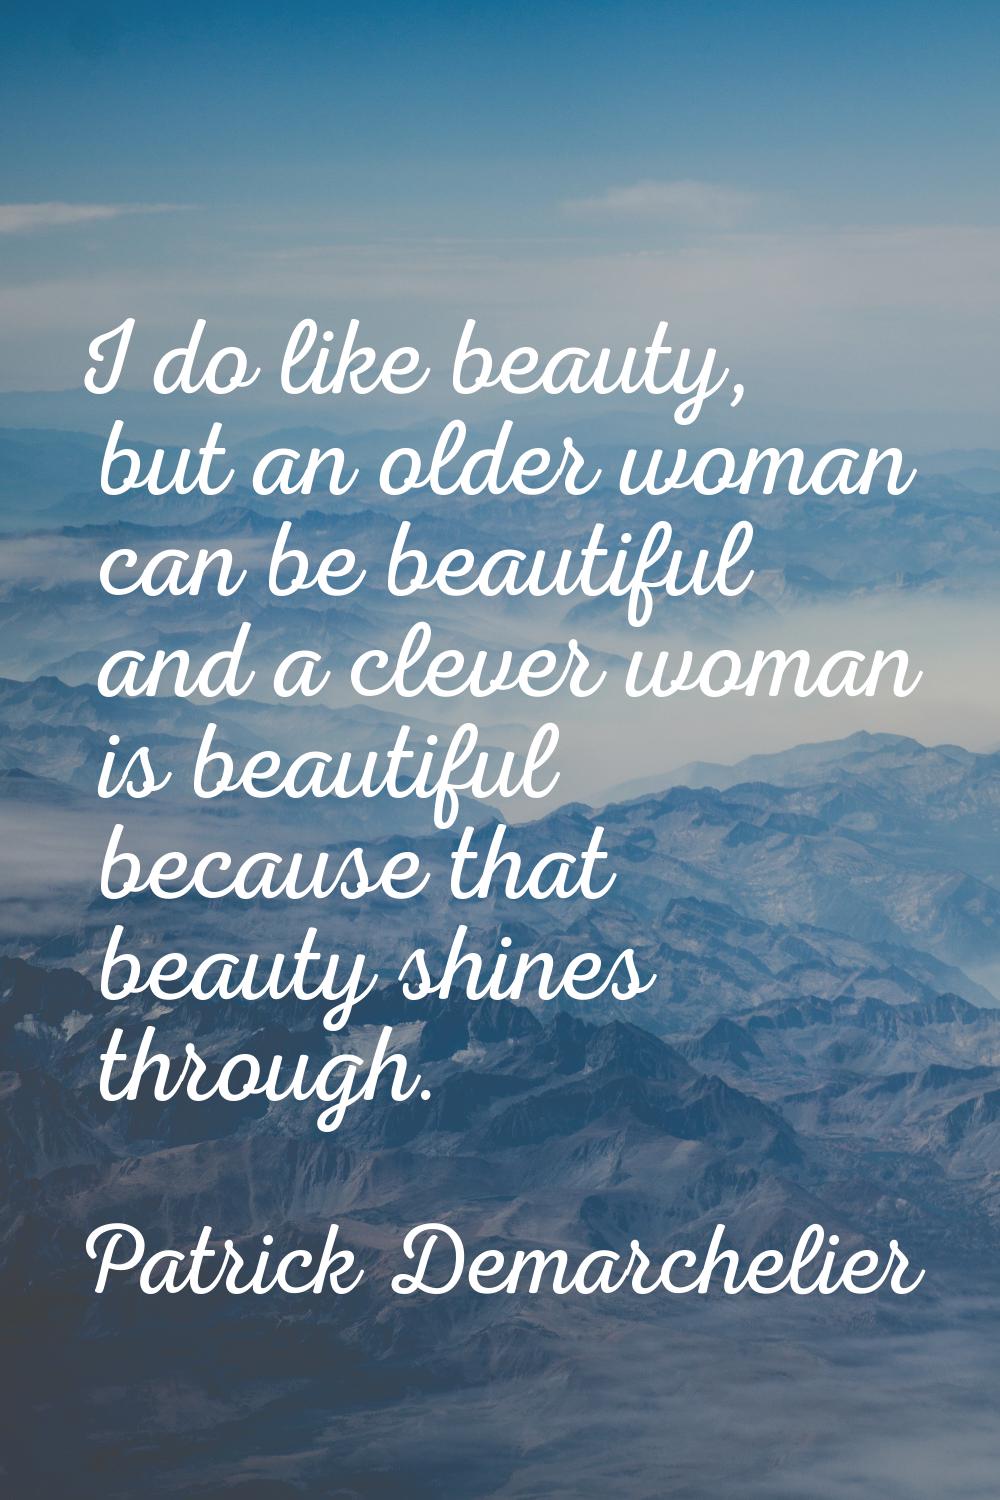 I do like beauty, but an older woman can be beautiful and a clever woman is beautiful because that 